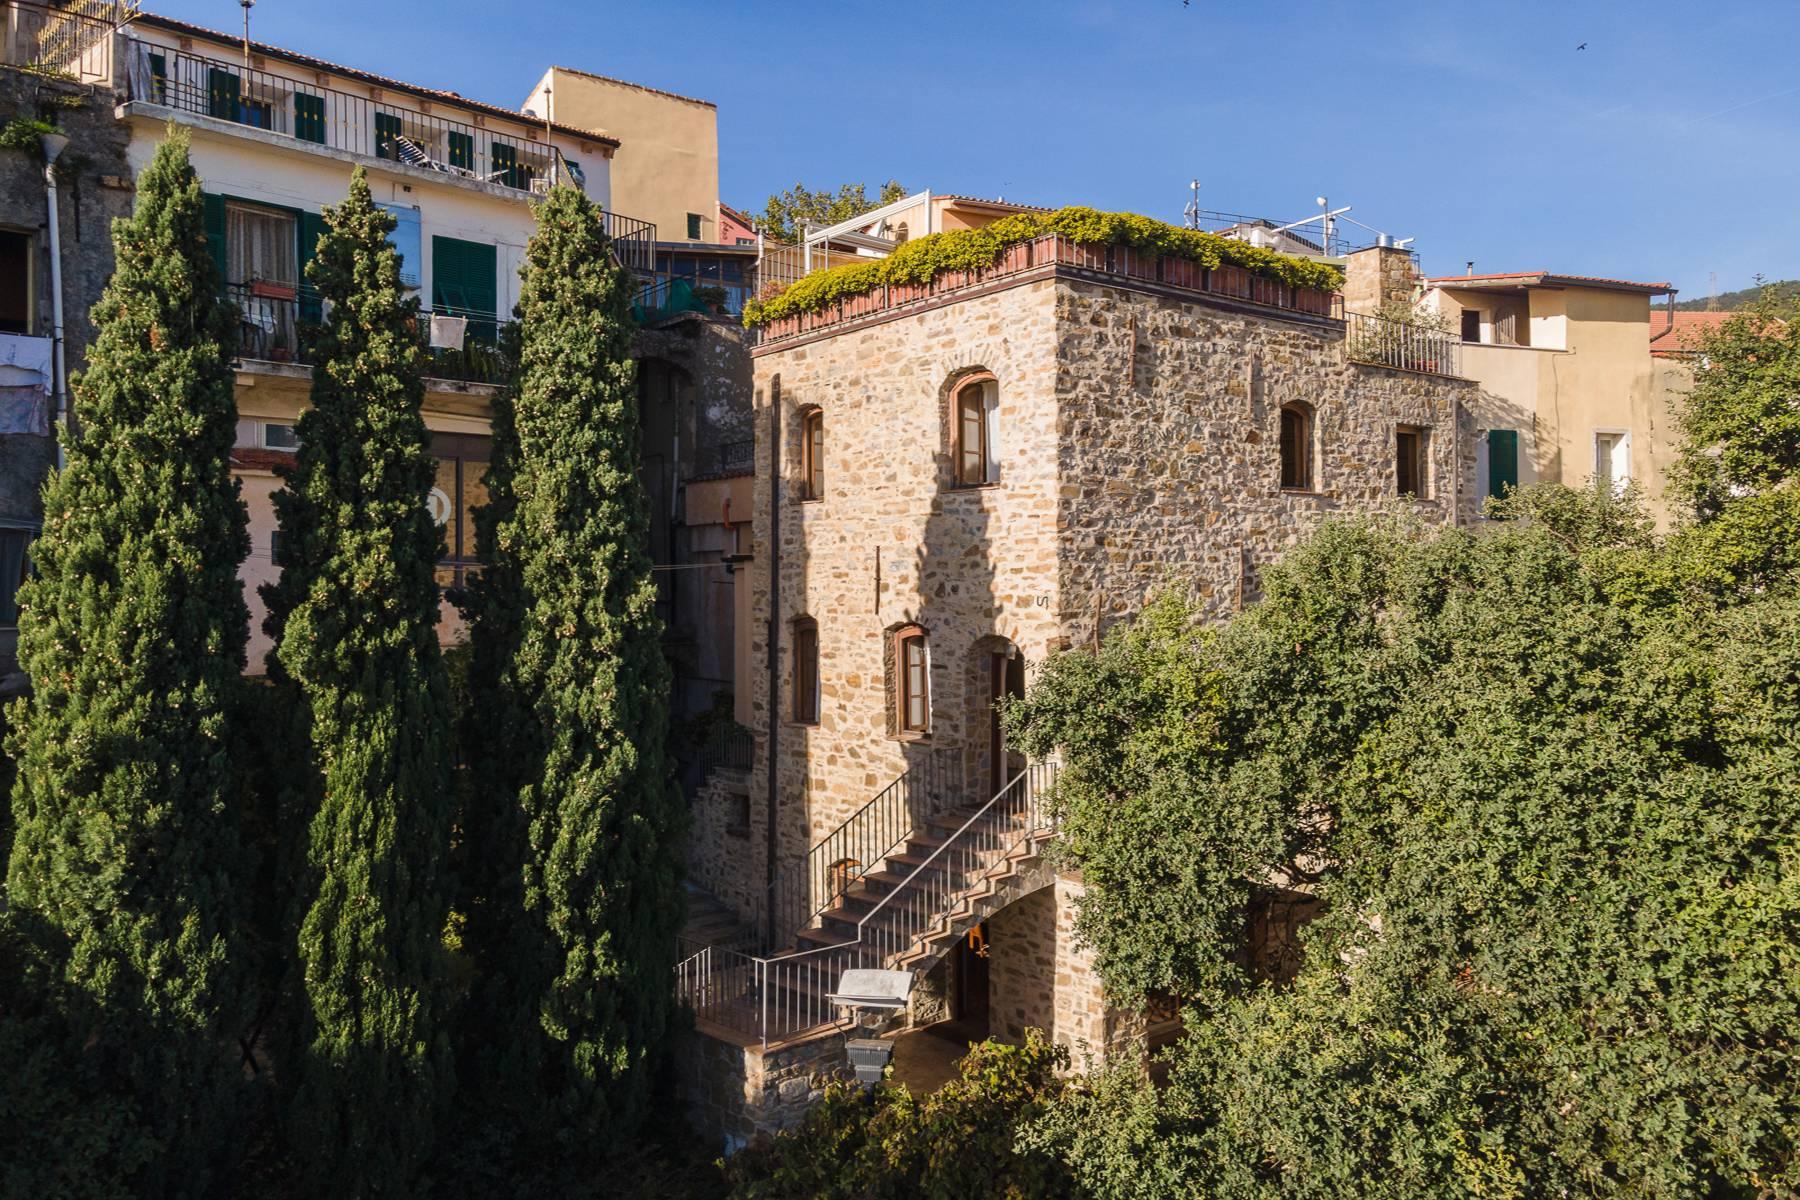 Charming villa in Torre Saracena, nestled in a tiny historic village overlooking Sanremo - Private Auction - 2